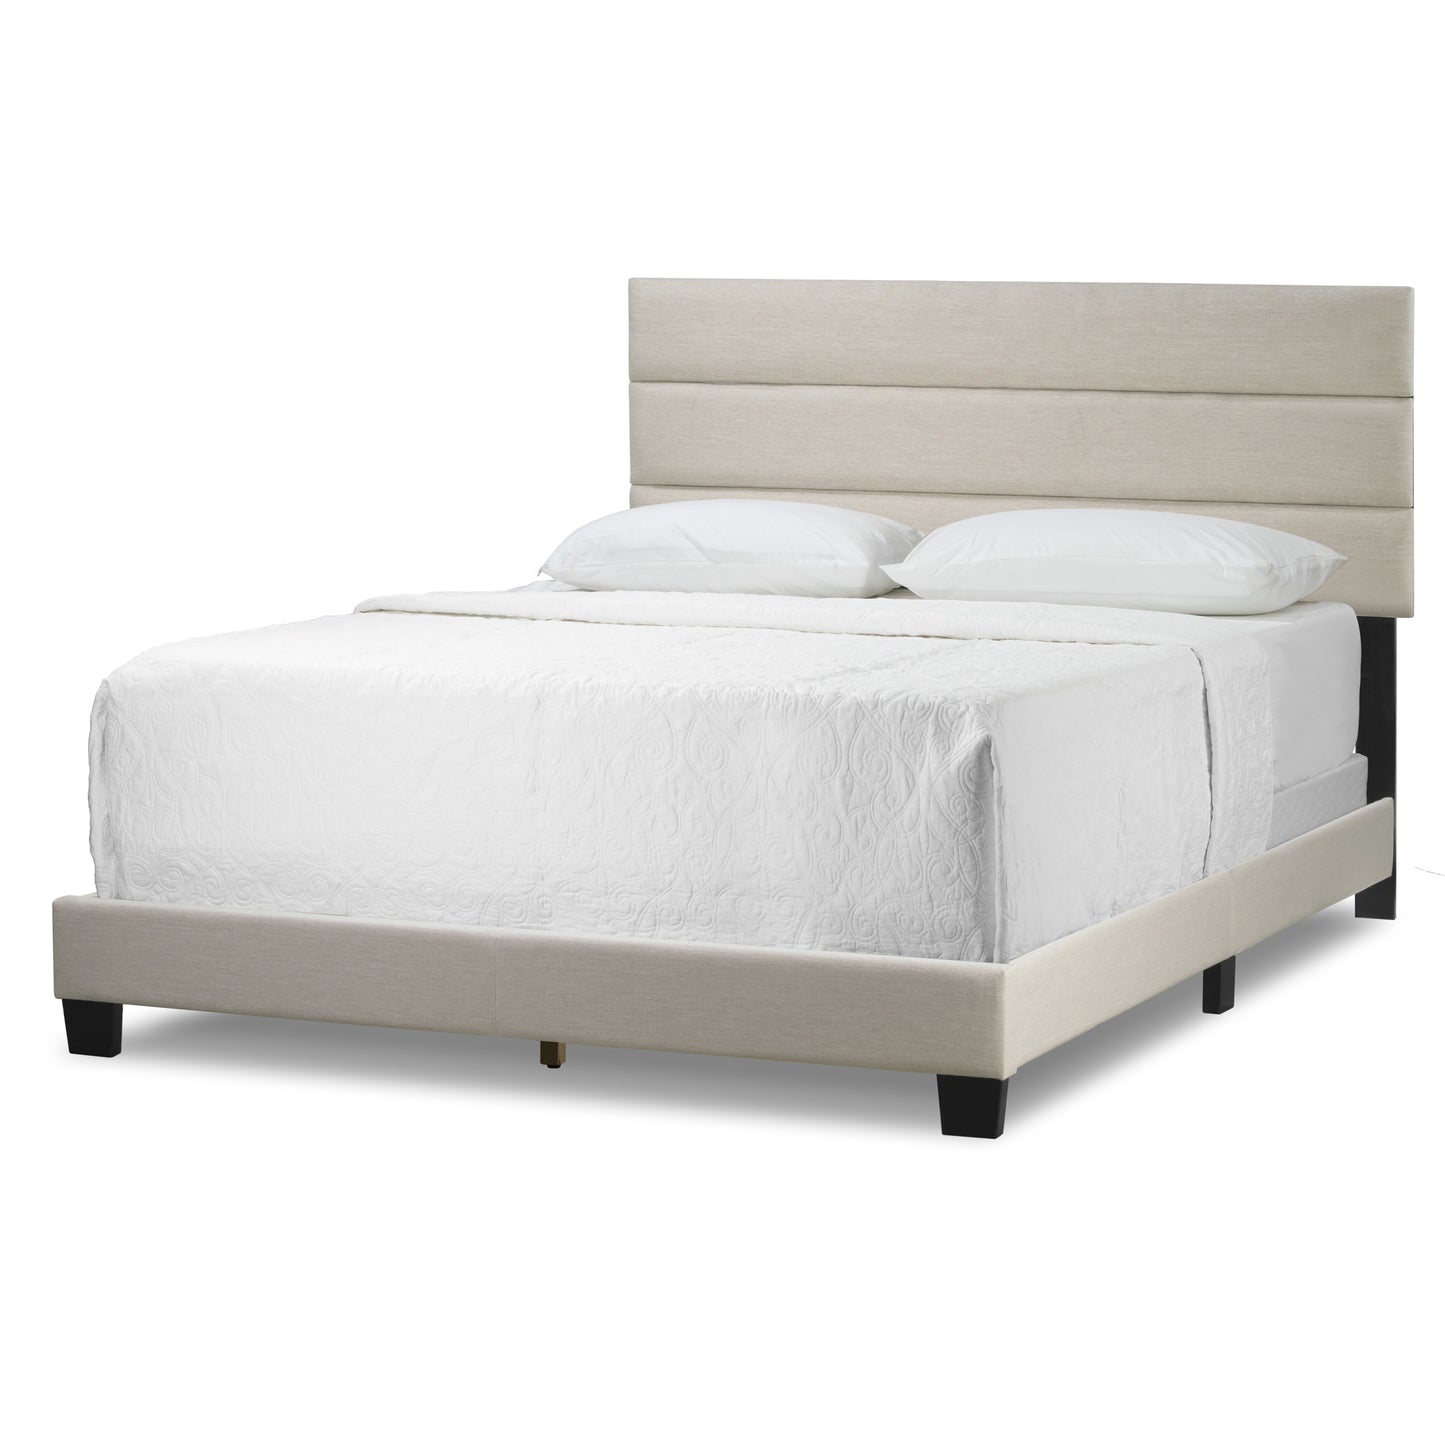 Aris Beige Fabric Queen Bed with Line Stitching Tufting